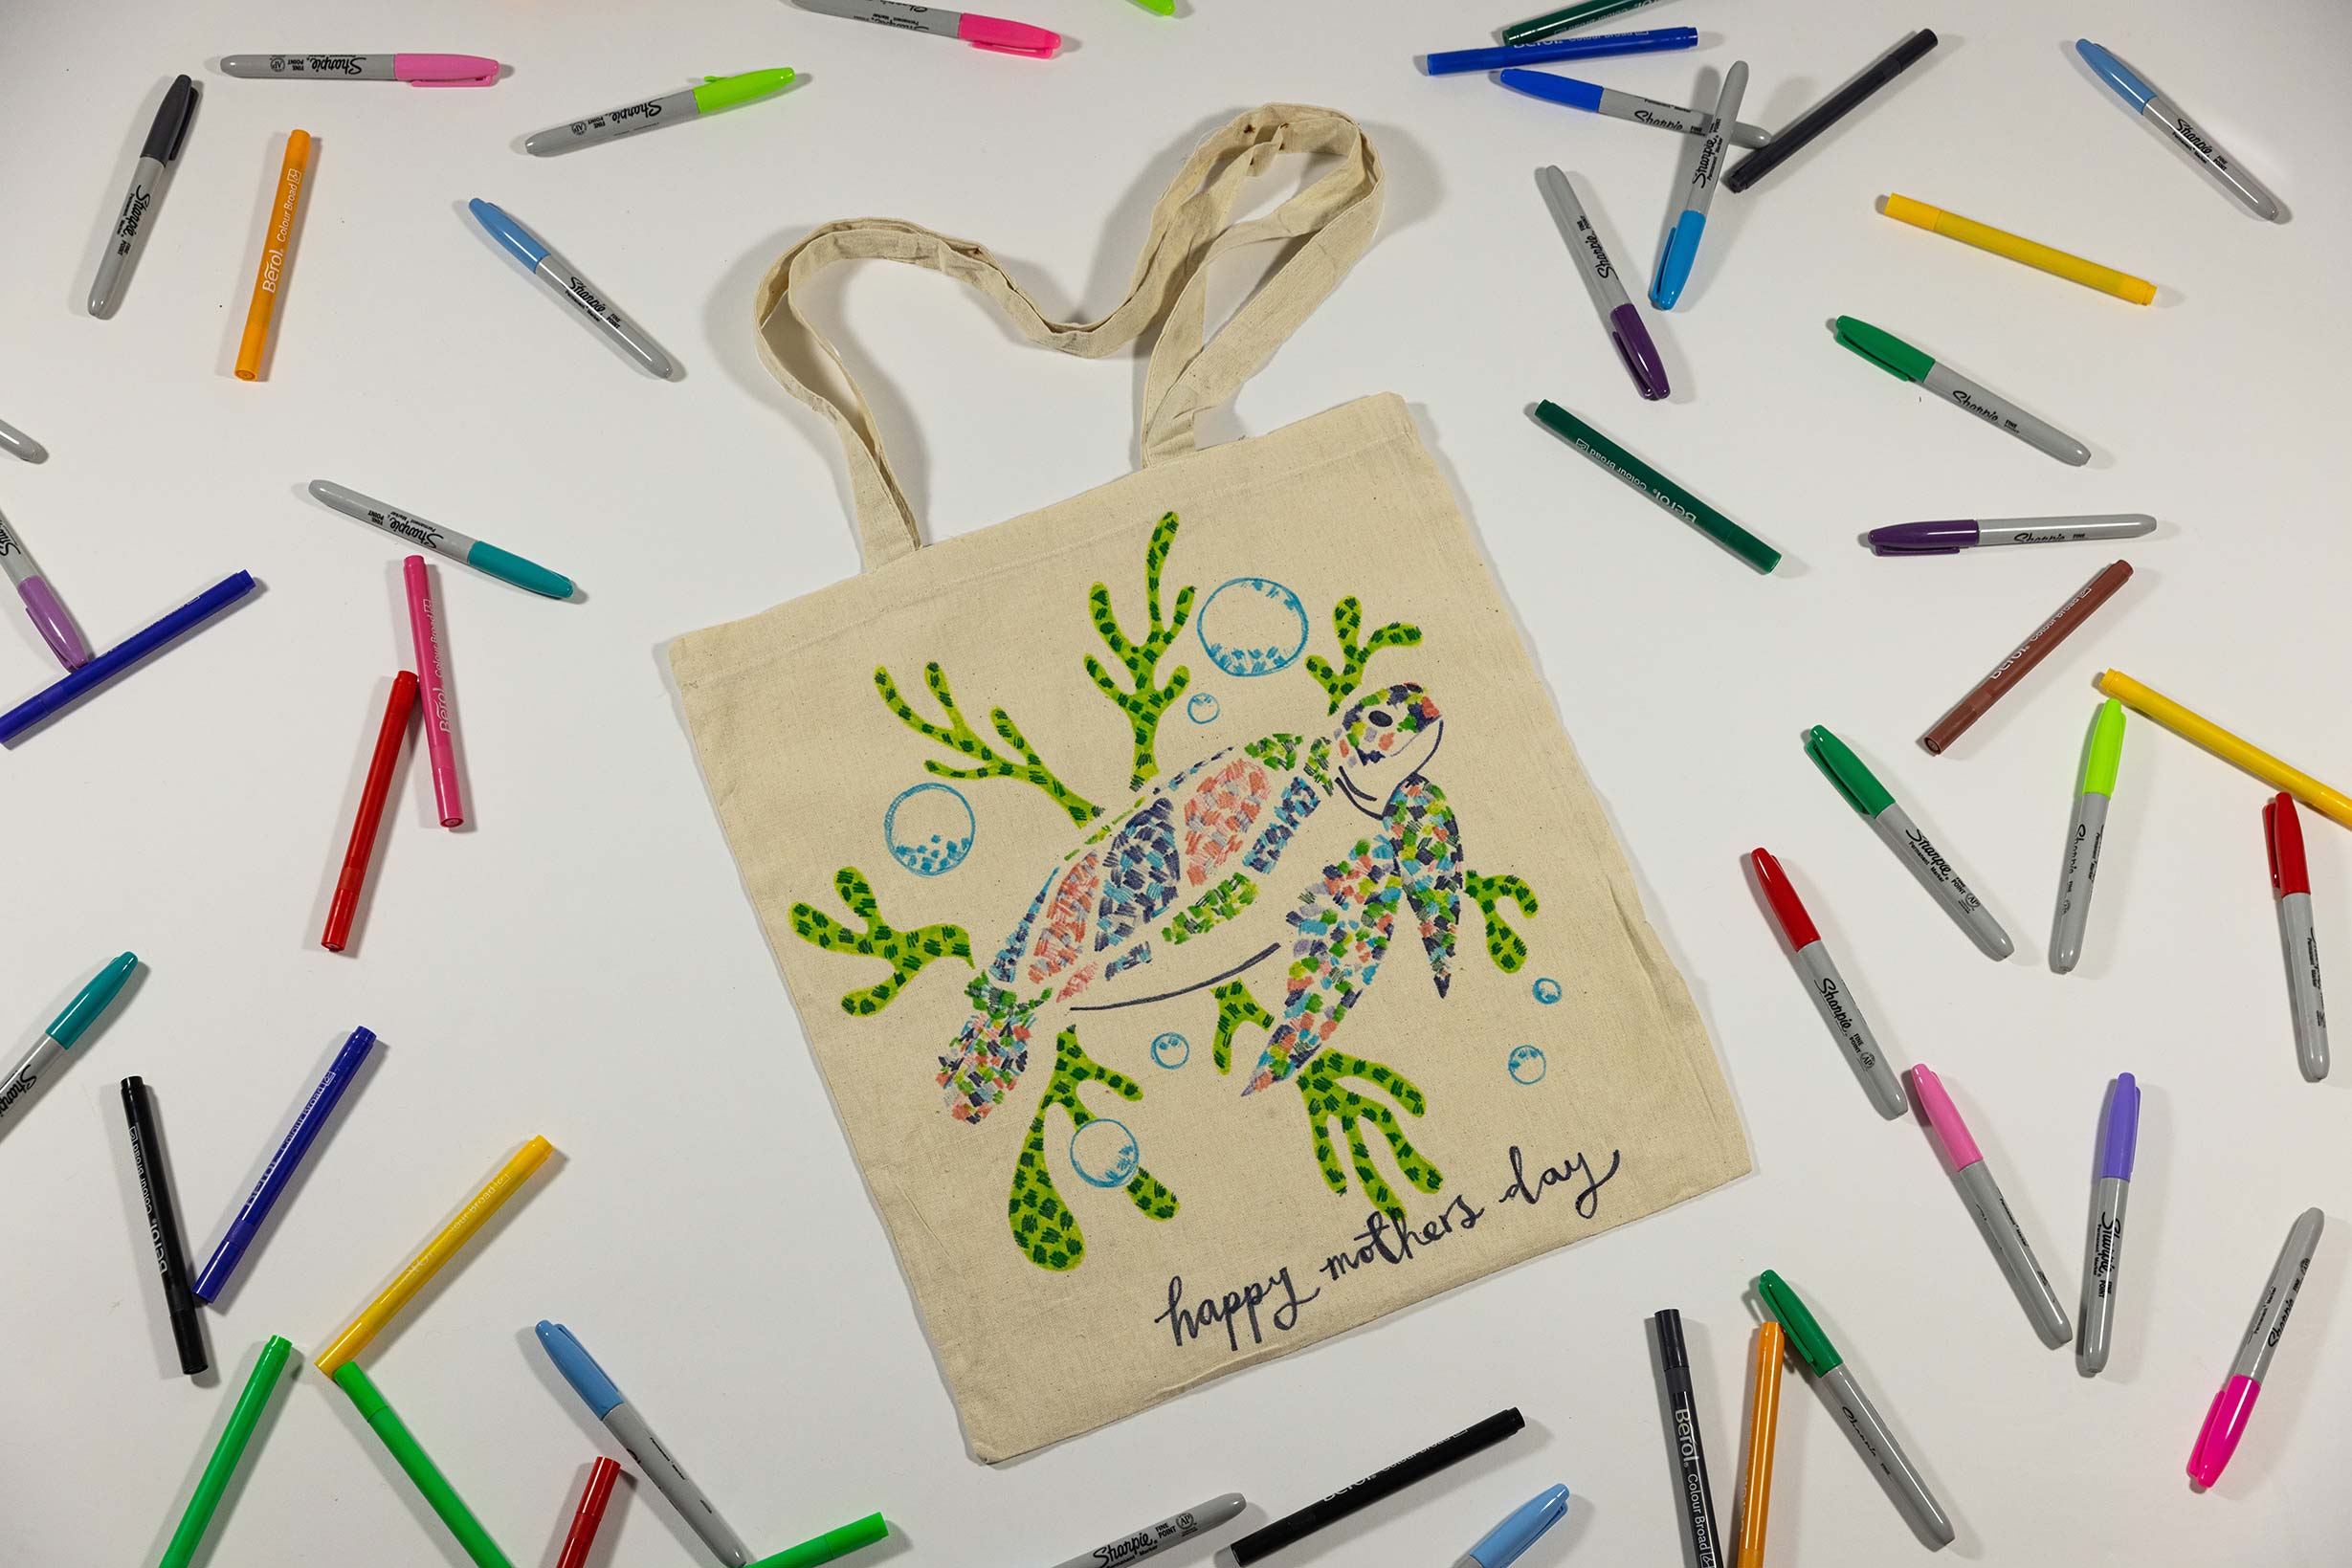 A tote bag with a turtle, some seaweed and the phrase 'happy mother's day' drawn on it.